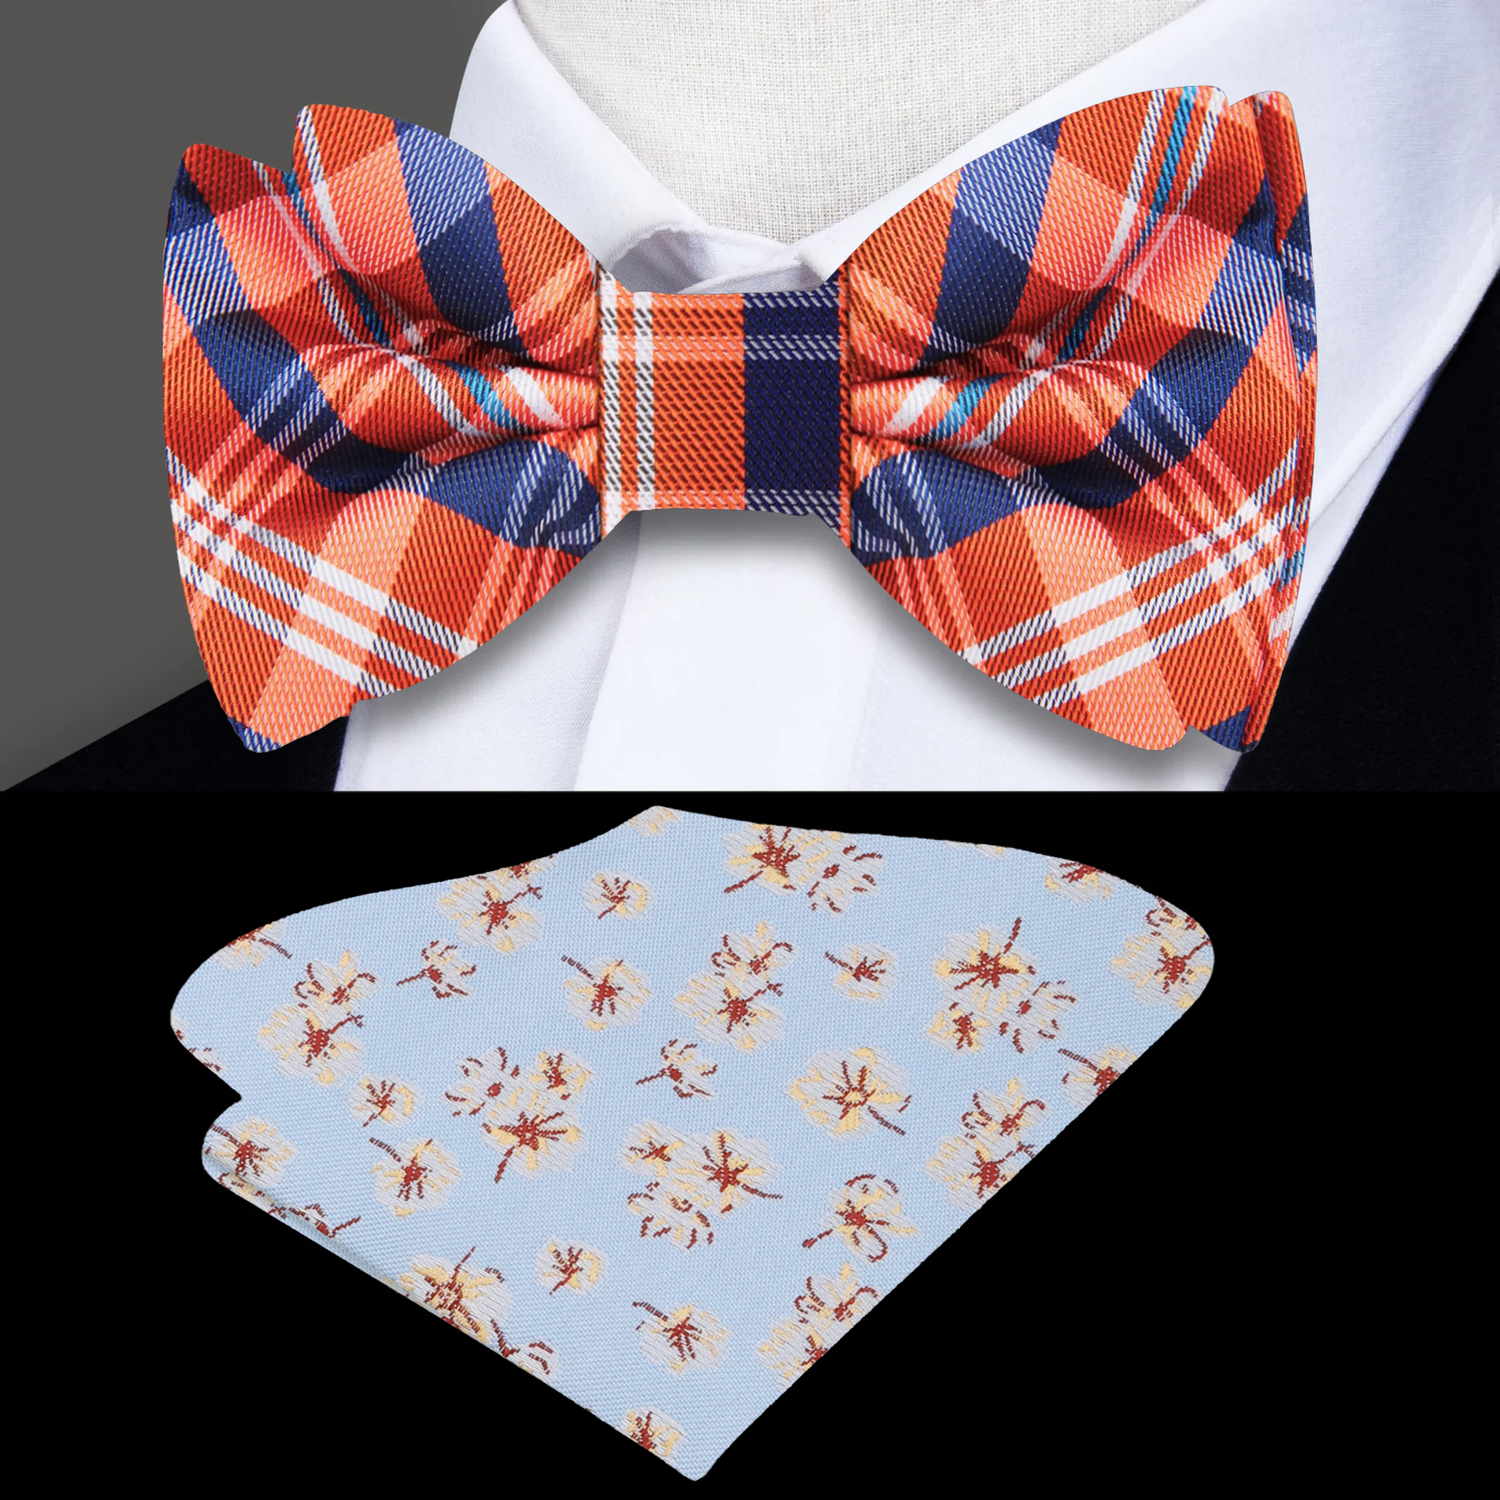 Orange and Blue Plaid Bow Tie and Accenting Blue Square